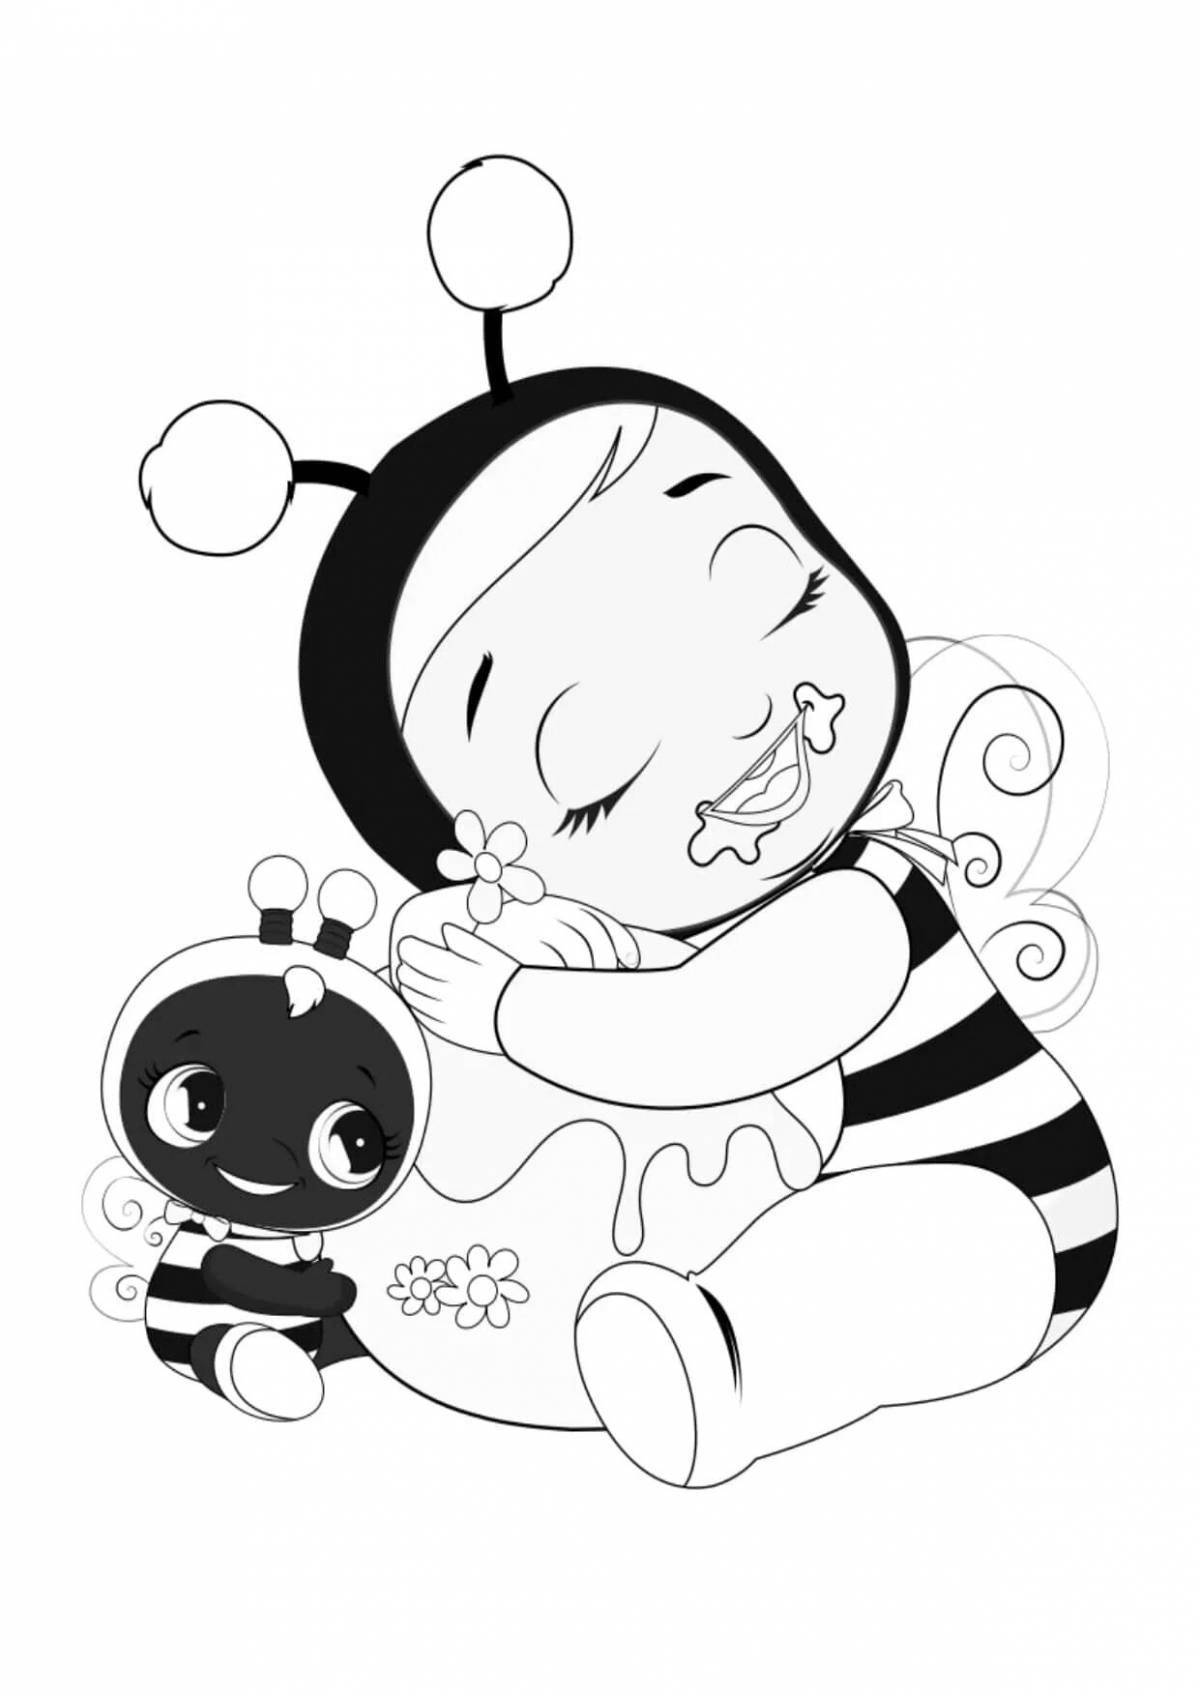 Adorable baby charon coloring page